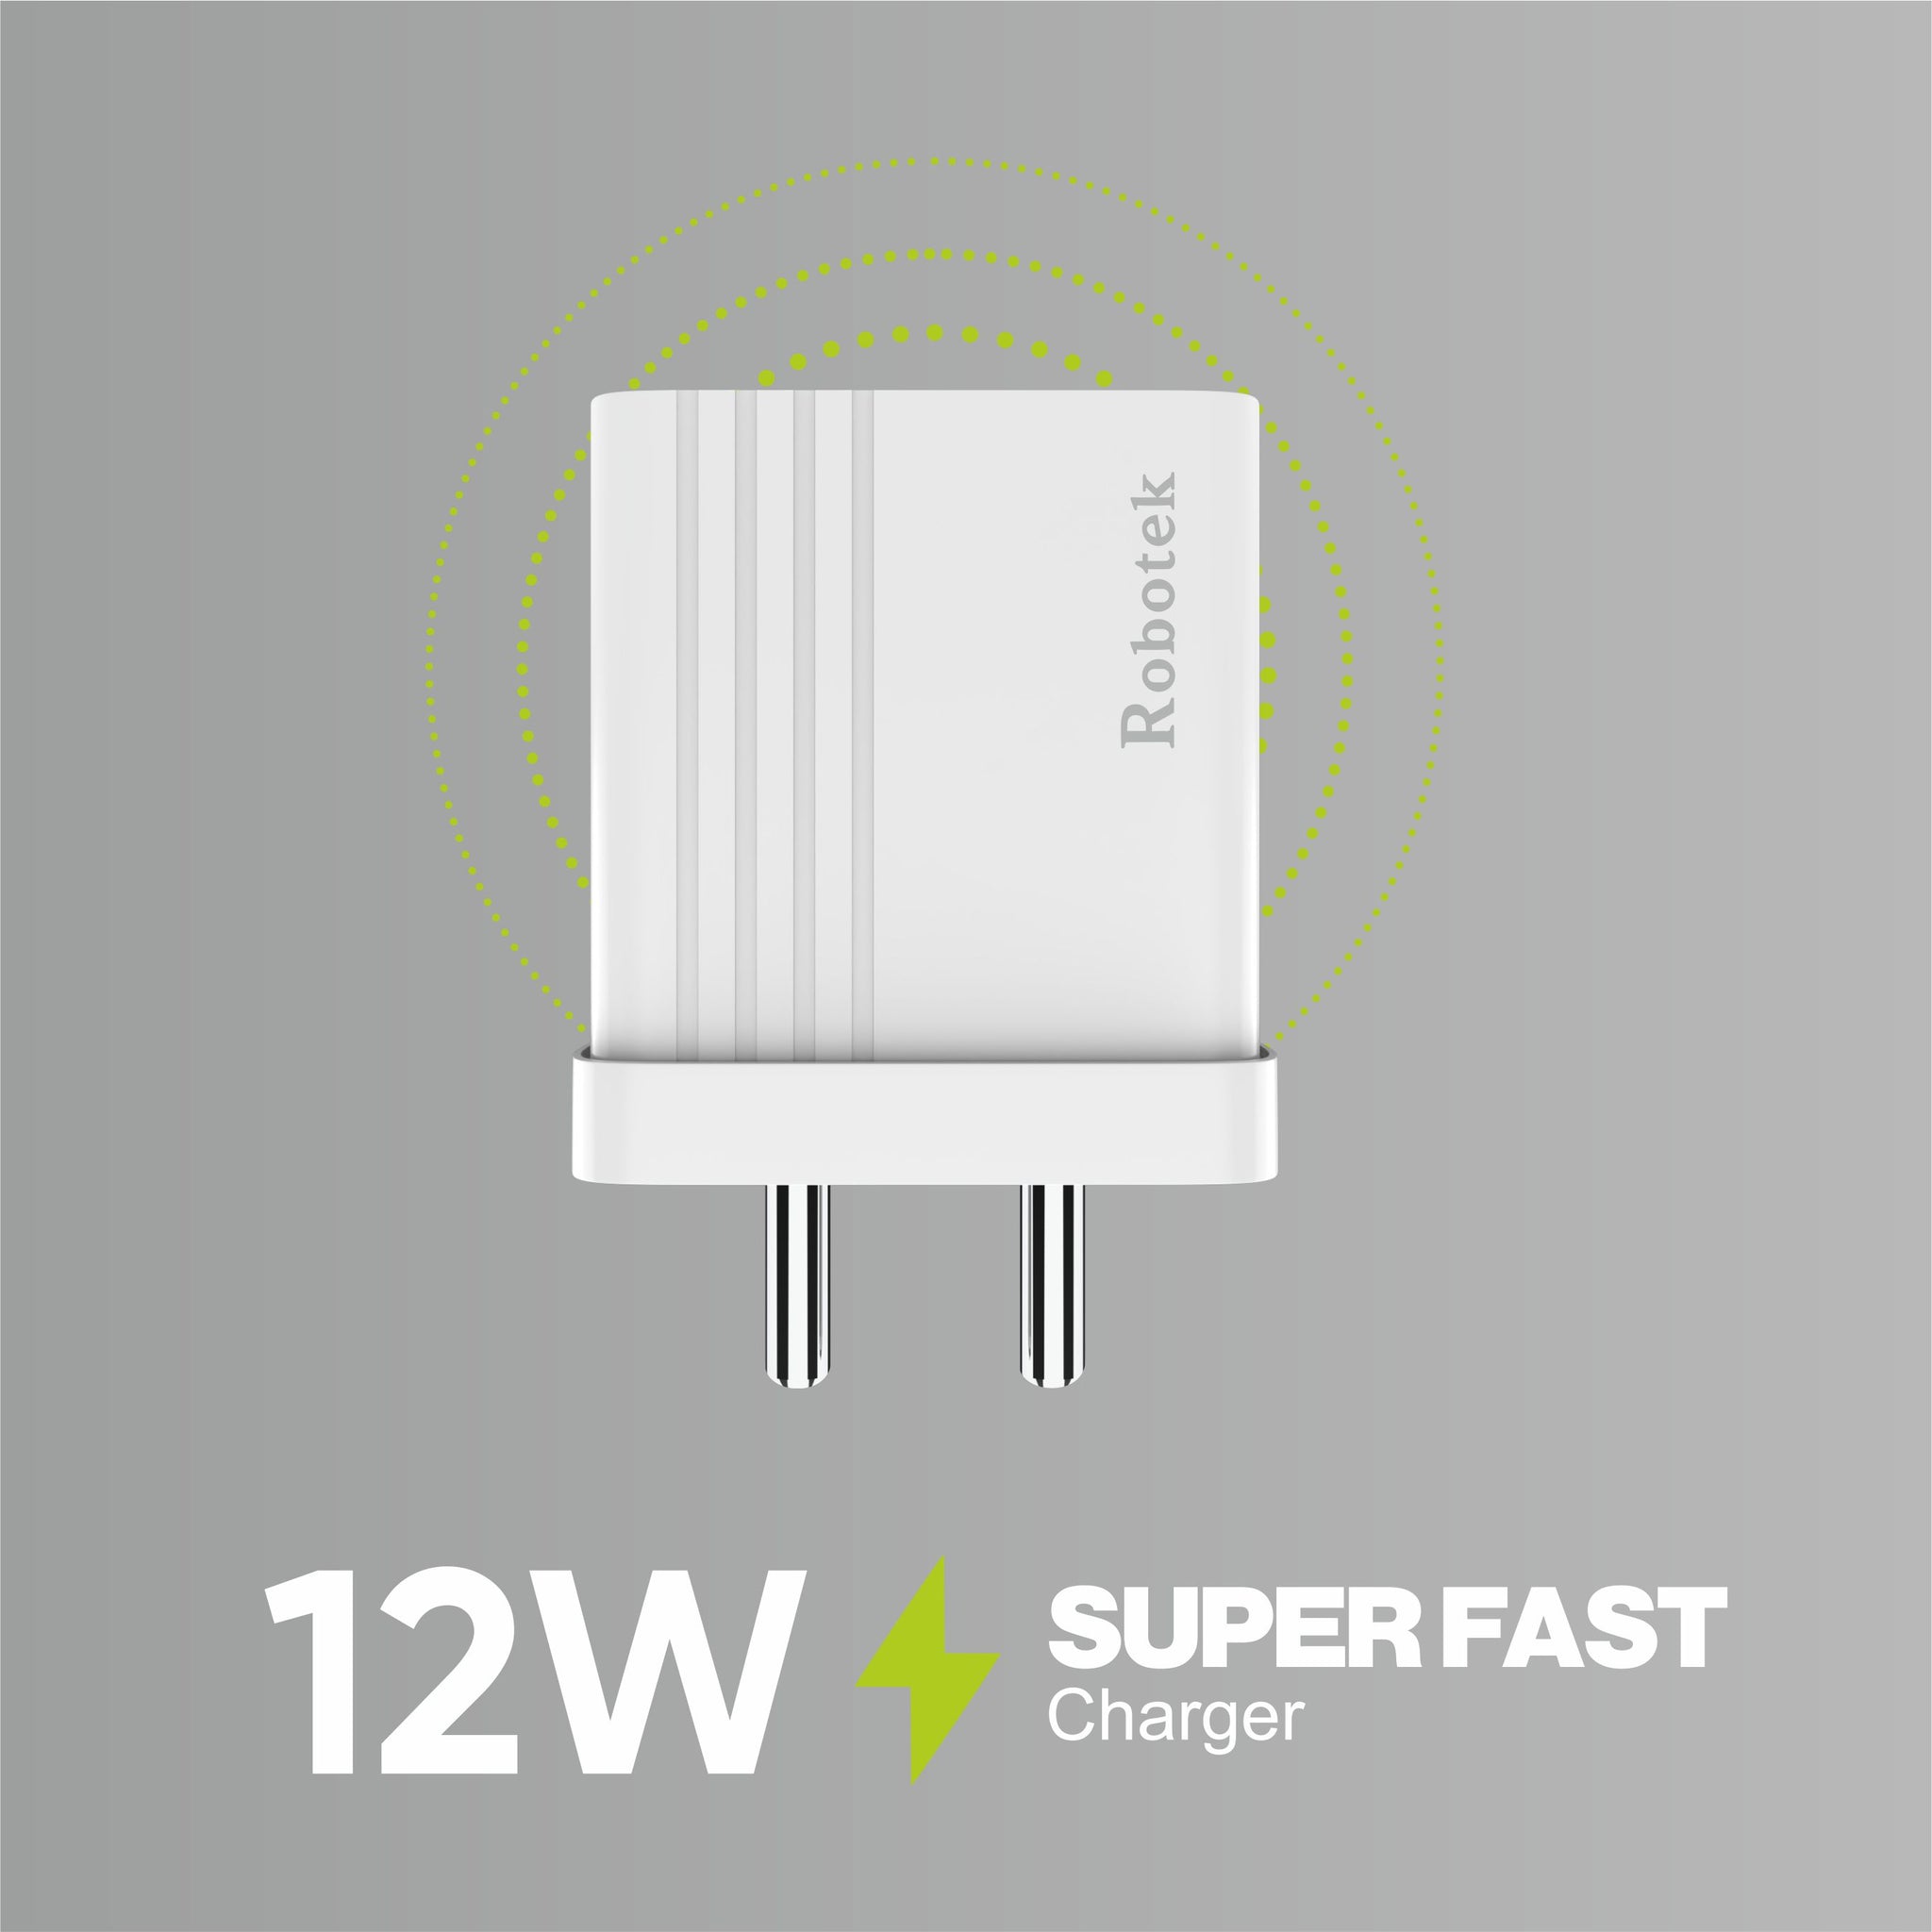 SC-224 Plus 12W 2.4A Mobile Wall Charger Adapter with USB to Type C/Micro USB v8/iPhone, Dual USB Port Travel Fast Charging Power Adapter for Mobile Phones & Tablets (White, Cable Included)